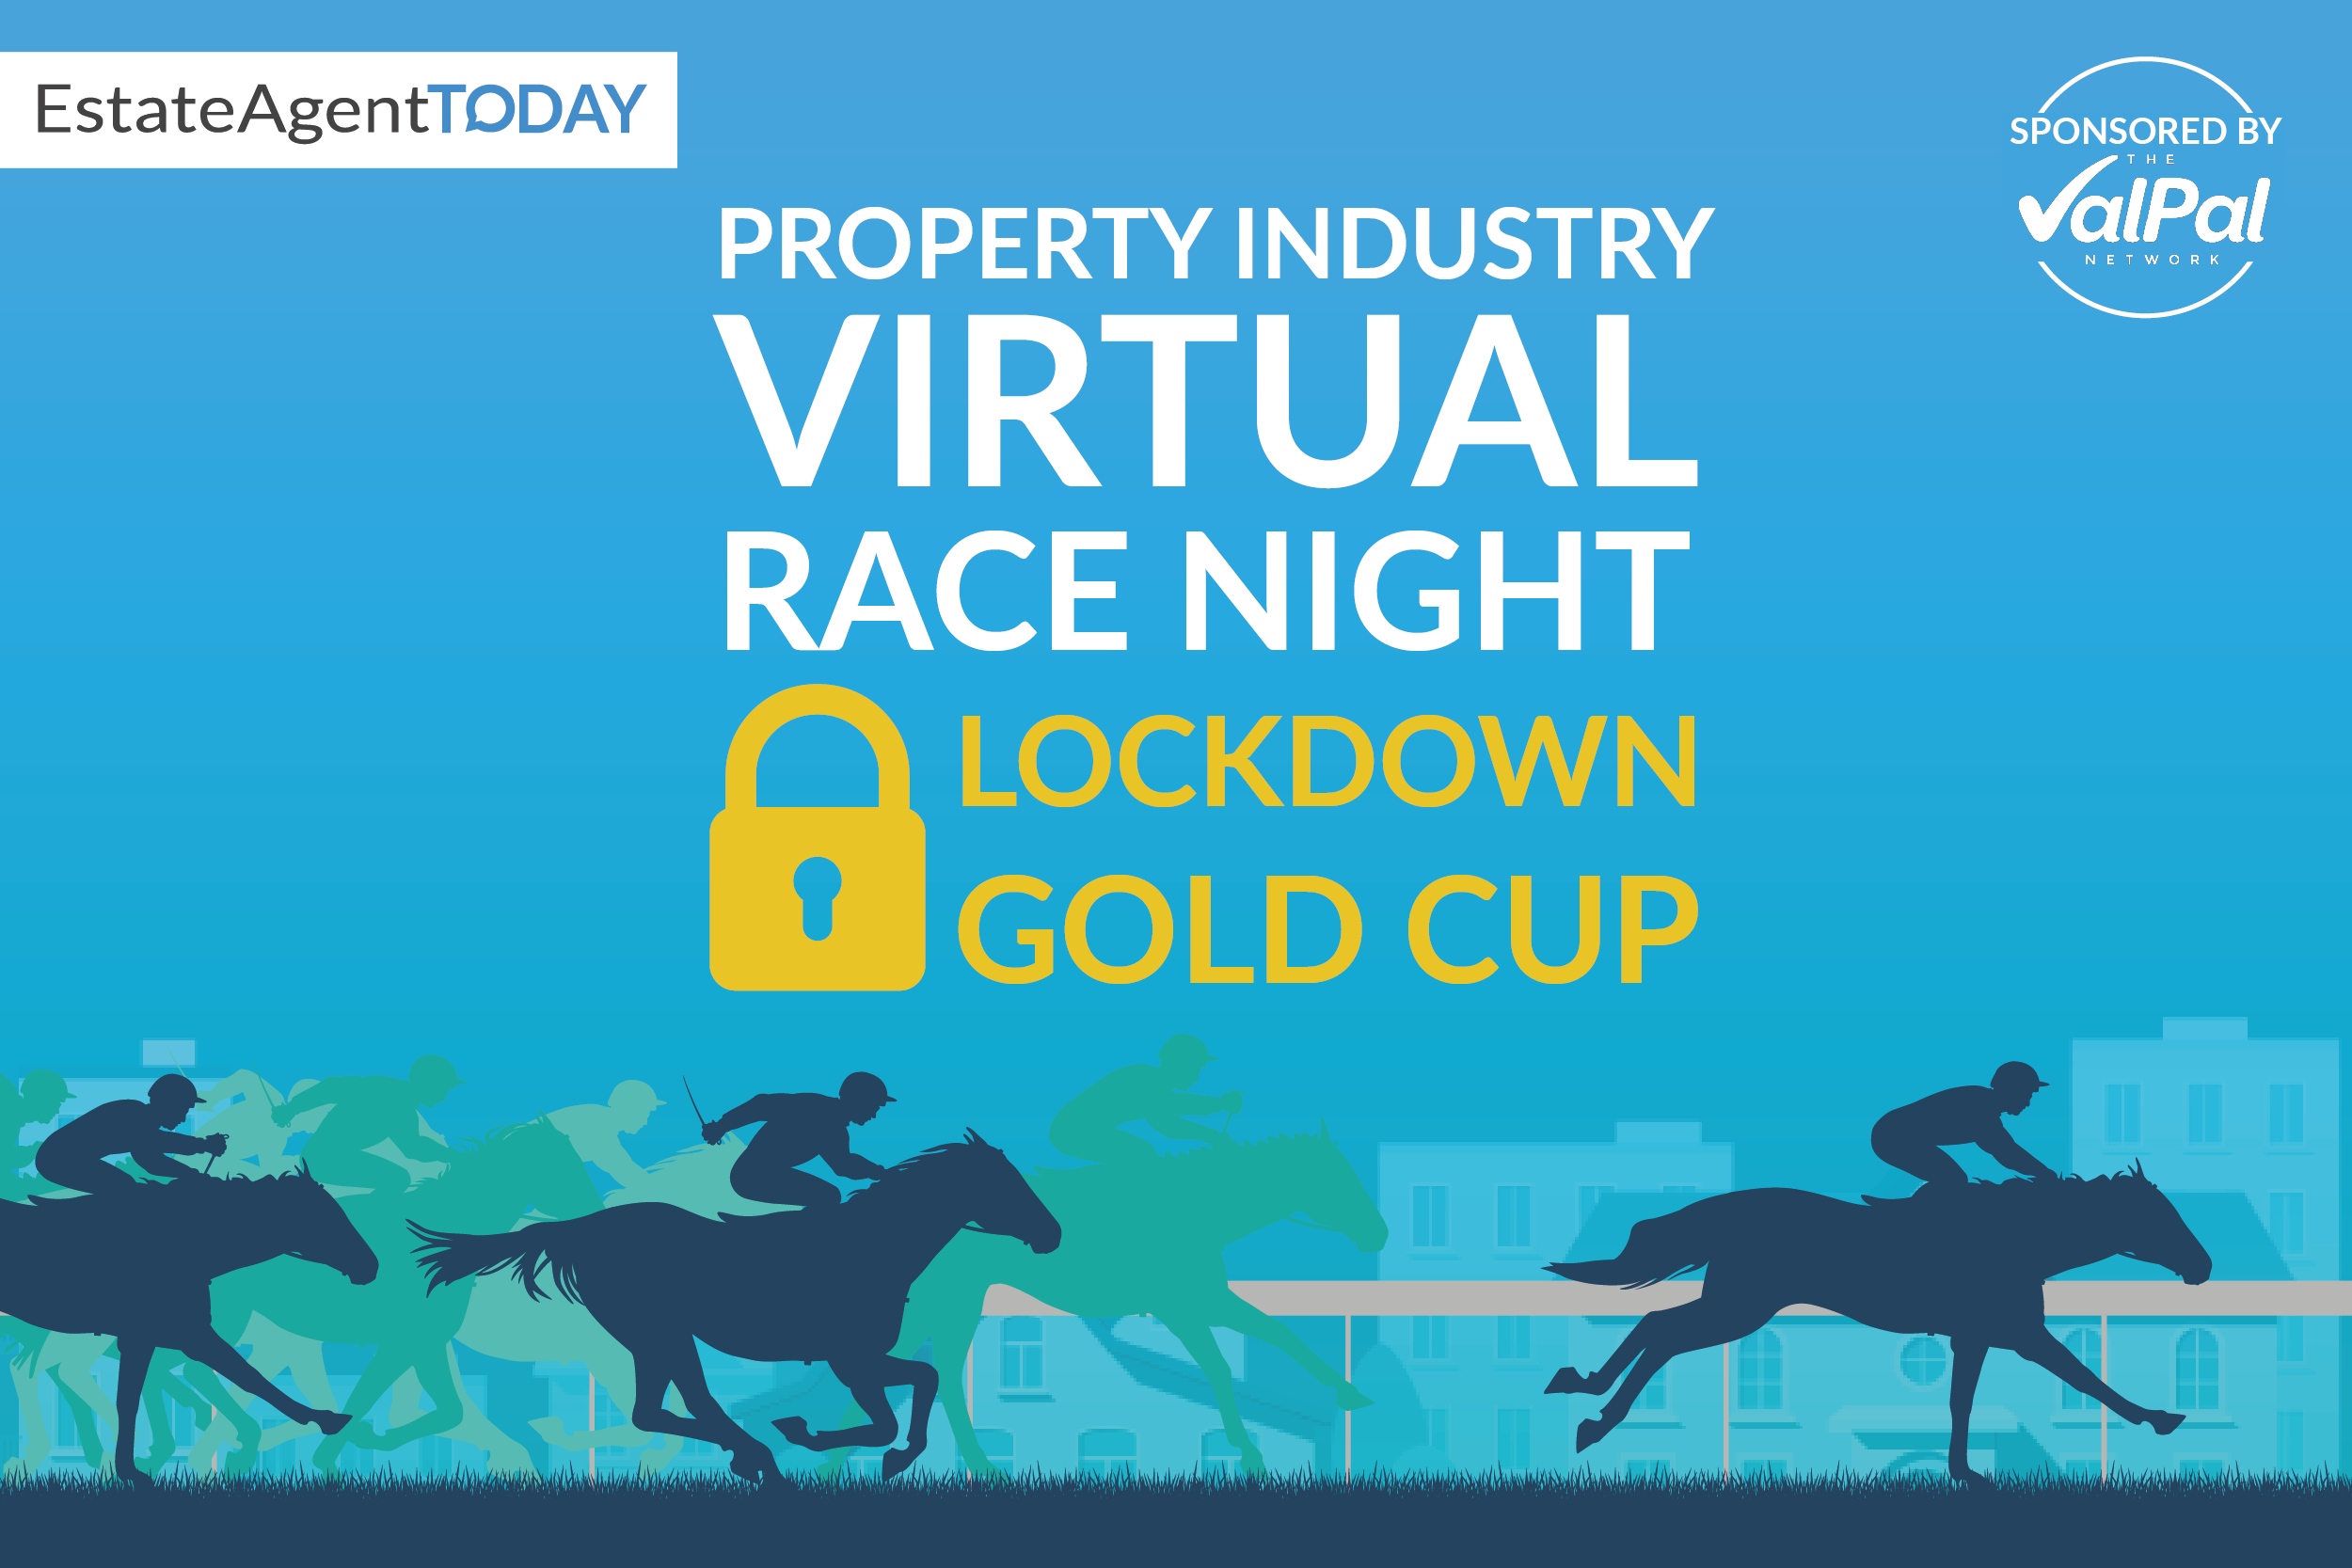 Will your team be first past the post? Join the ValPal-sponsored Lockdown Gold Cup!